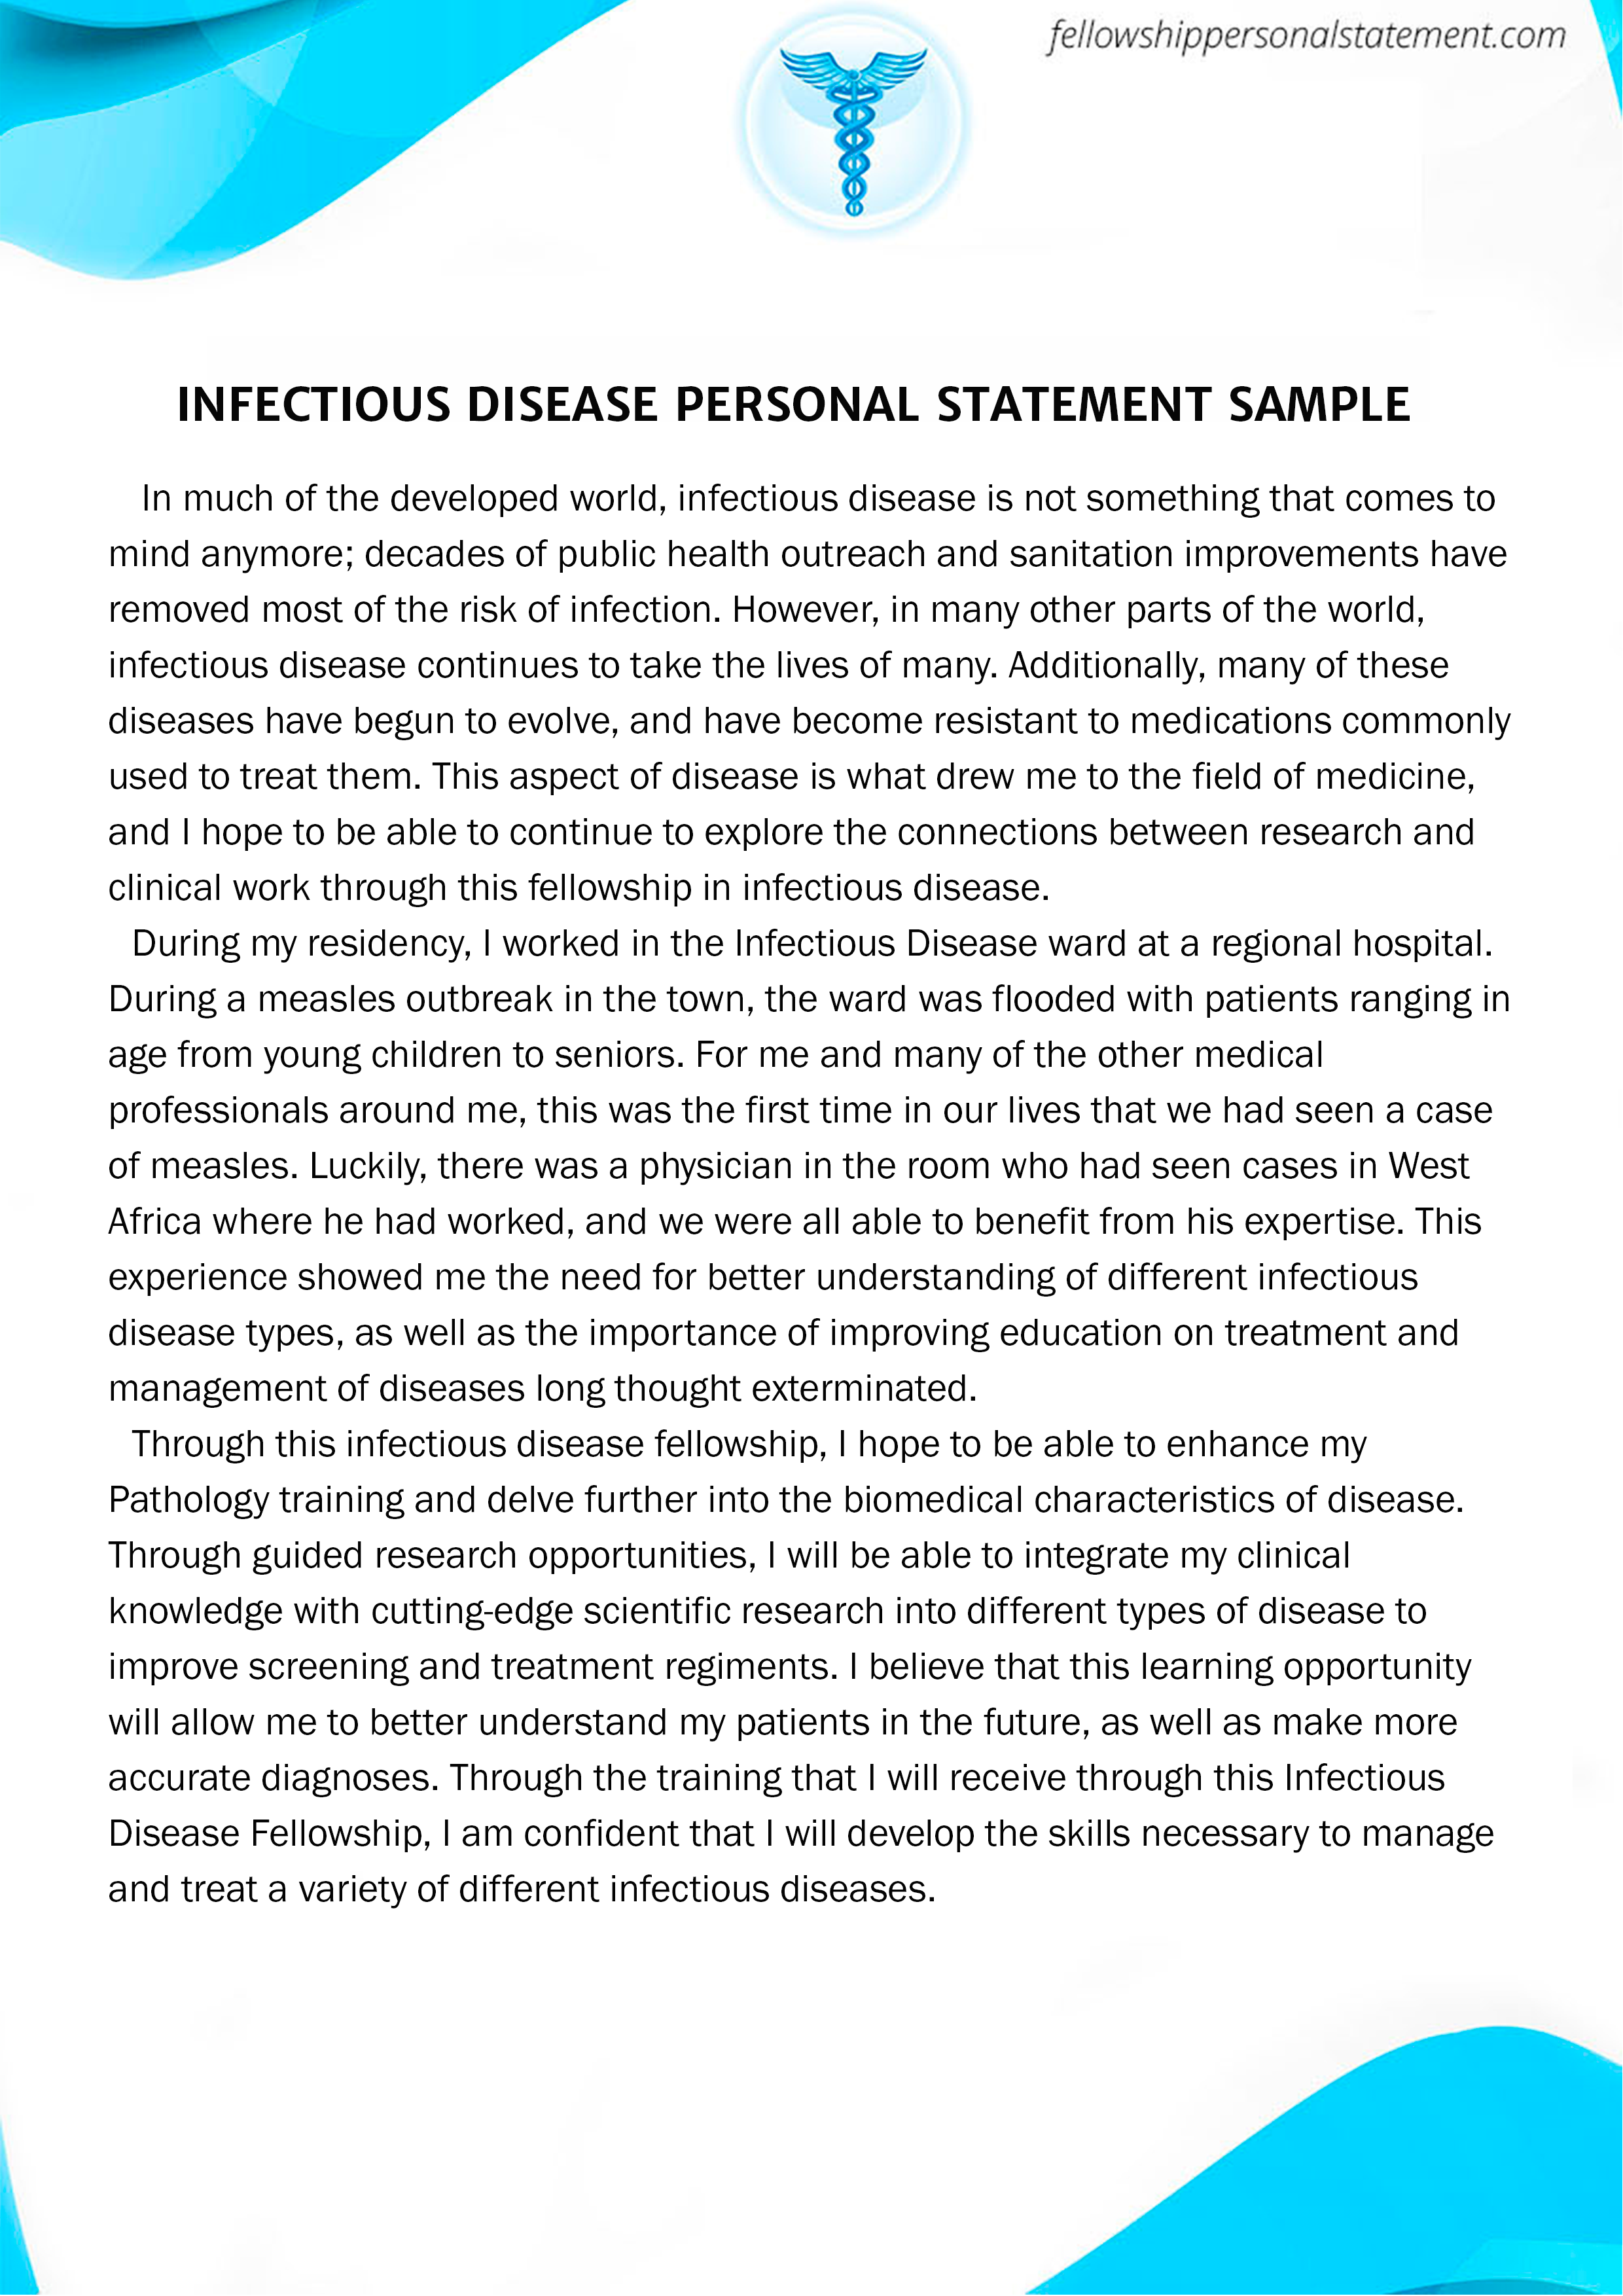 personal statement infectious disease fellowship